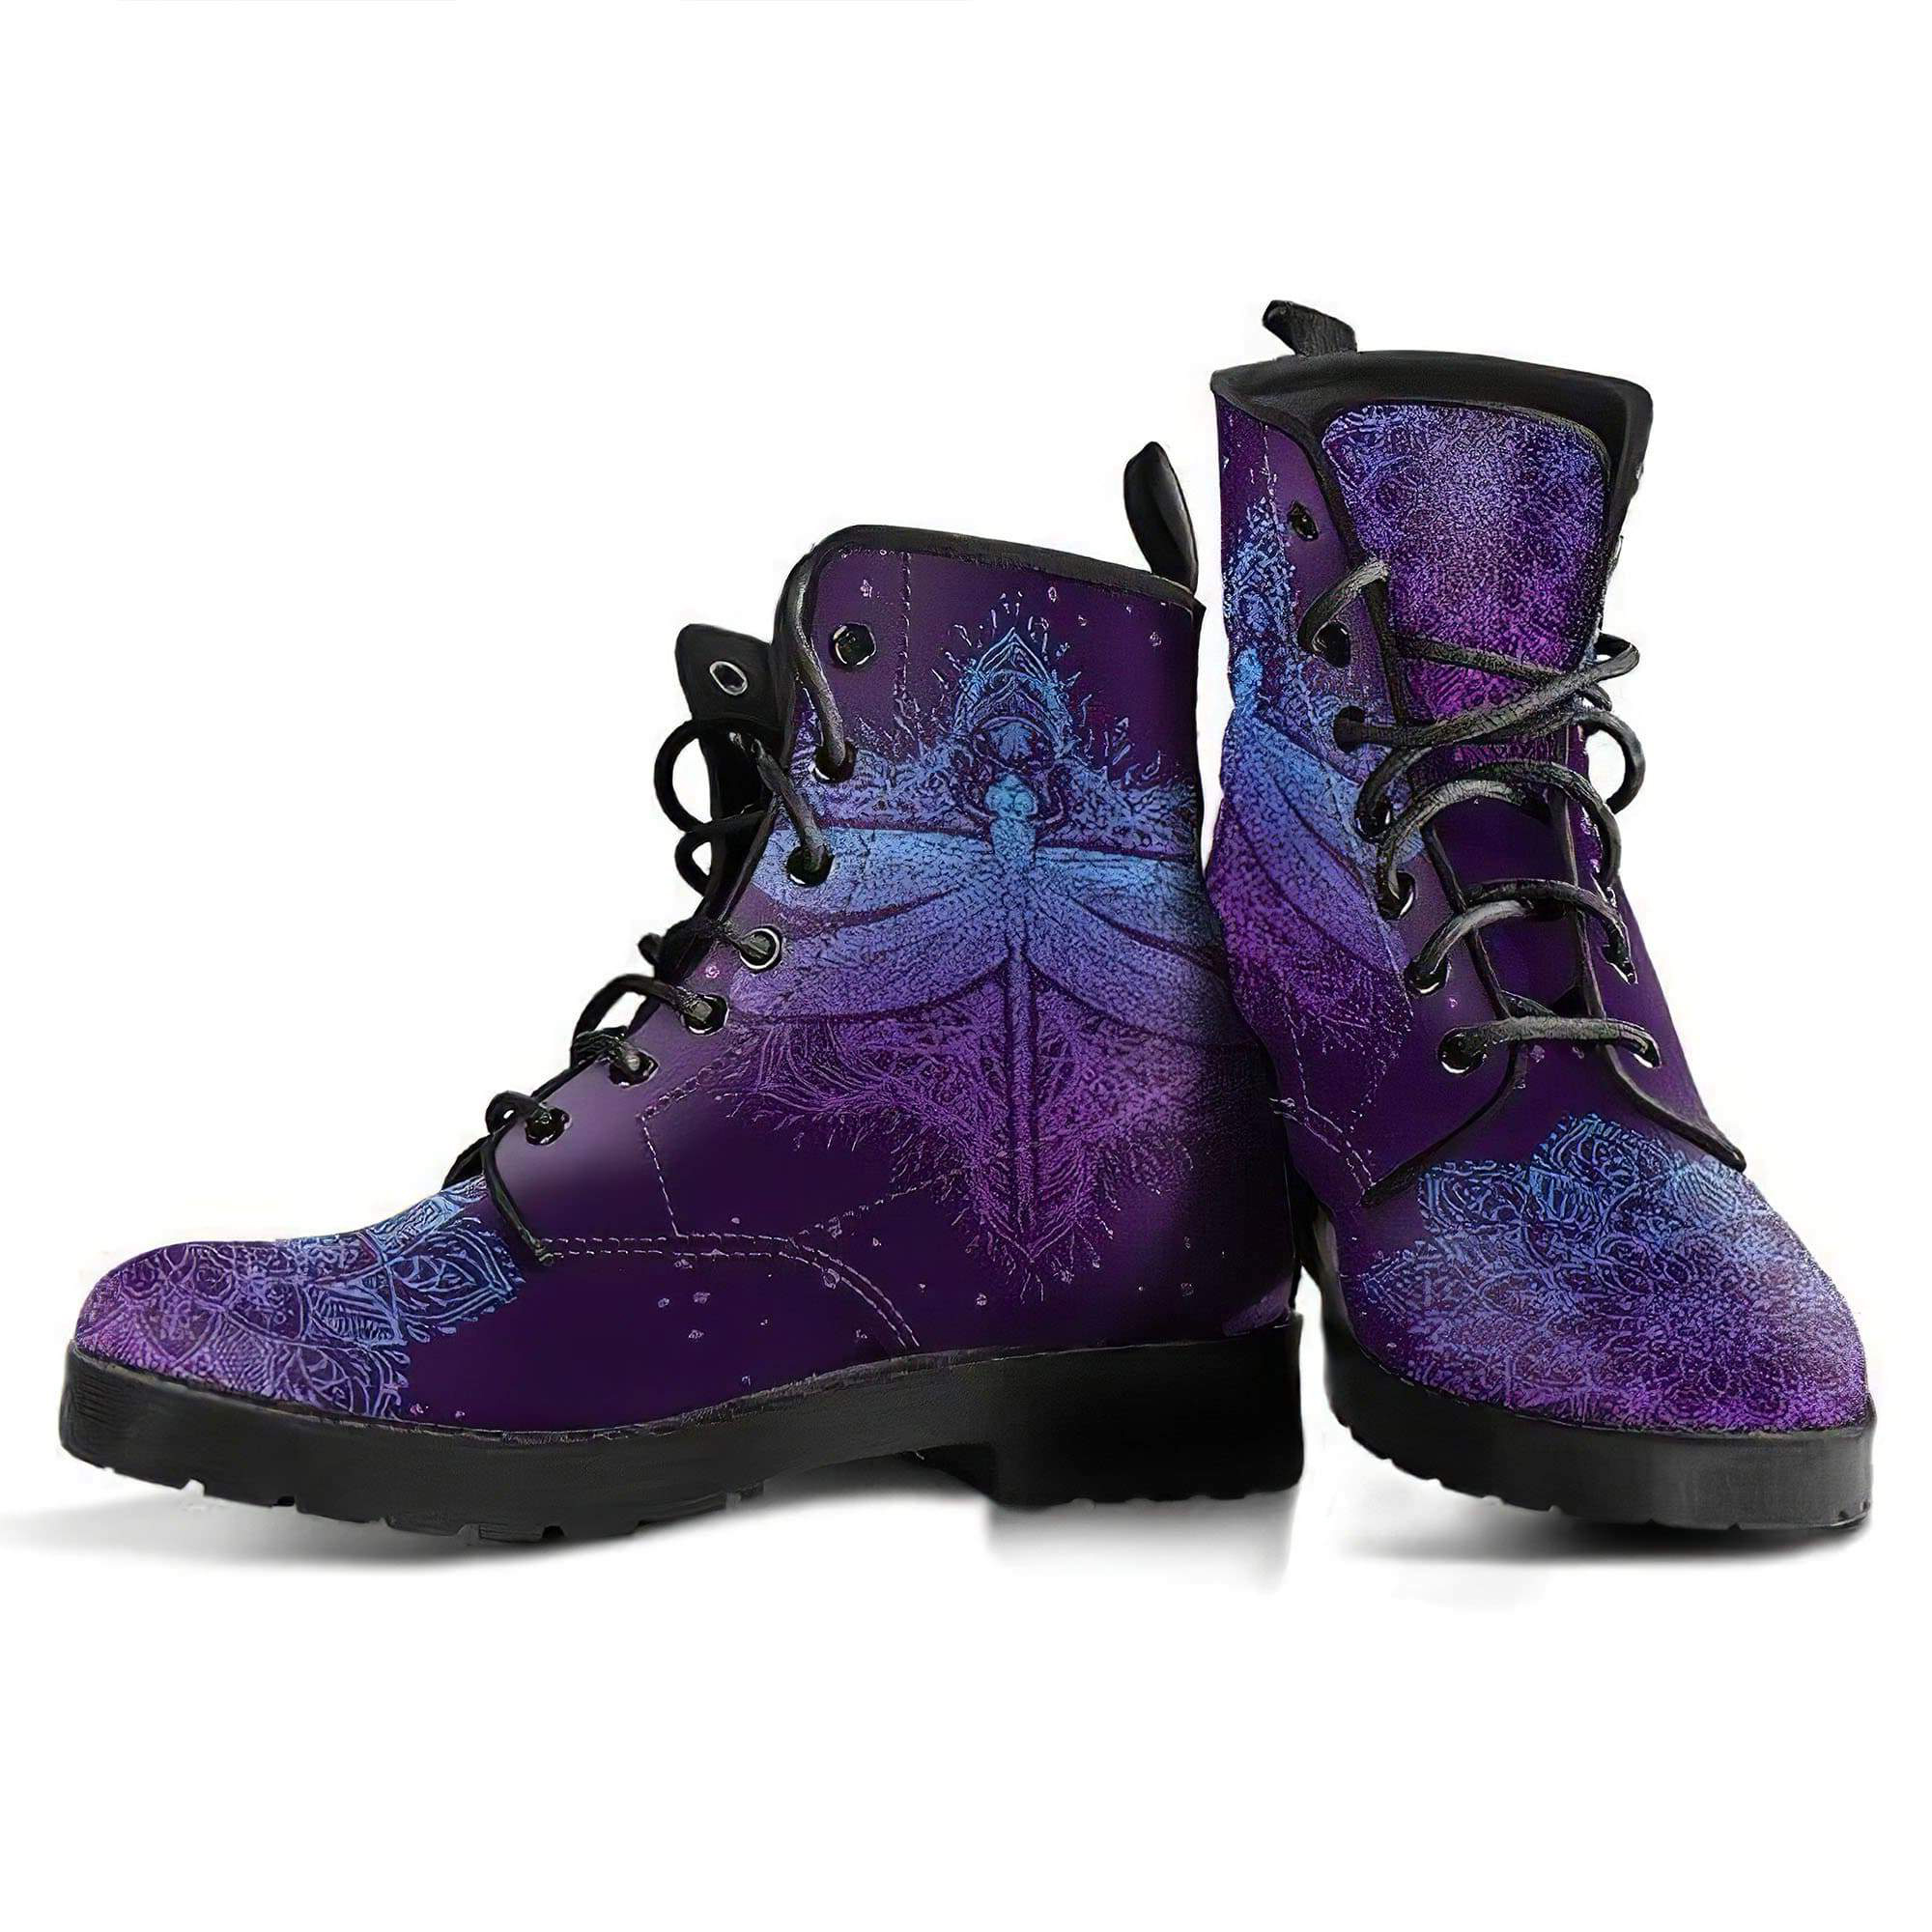 purple-mandala-dragonfly-handcrafted-boots-women-s-leather-boots-12051936706621.jpg